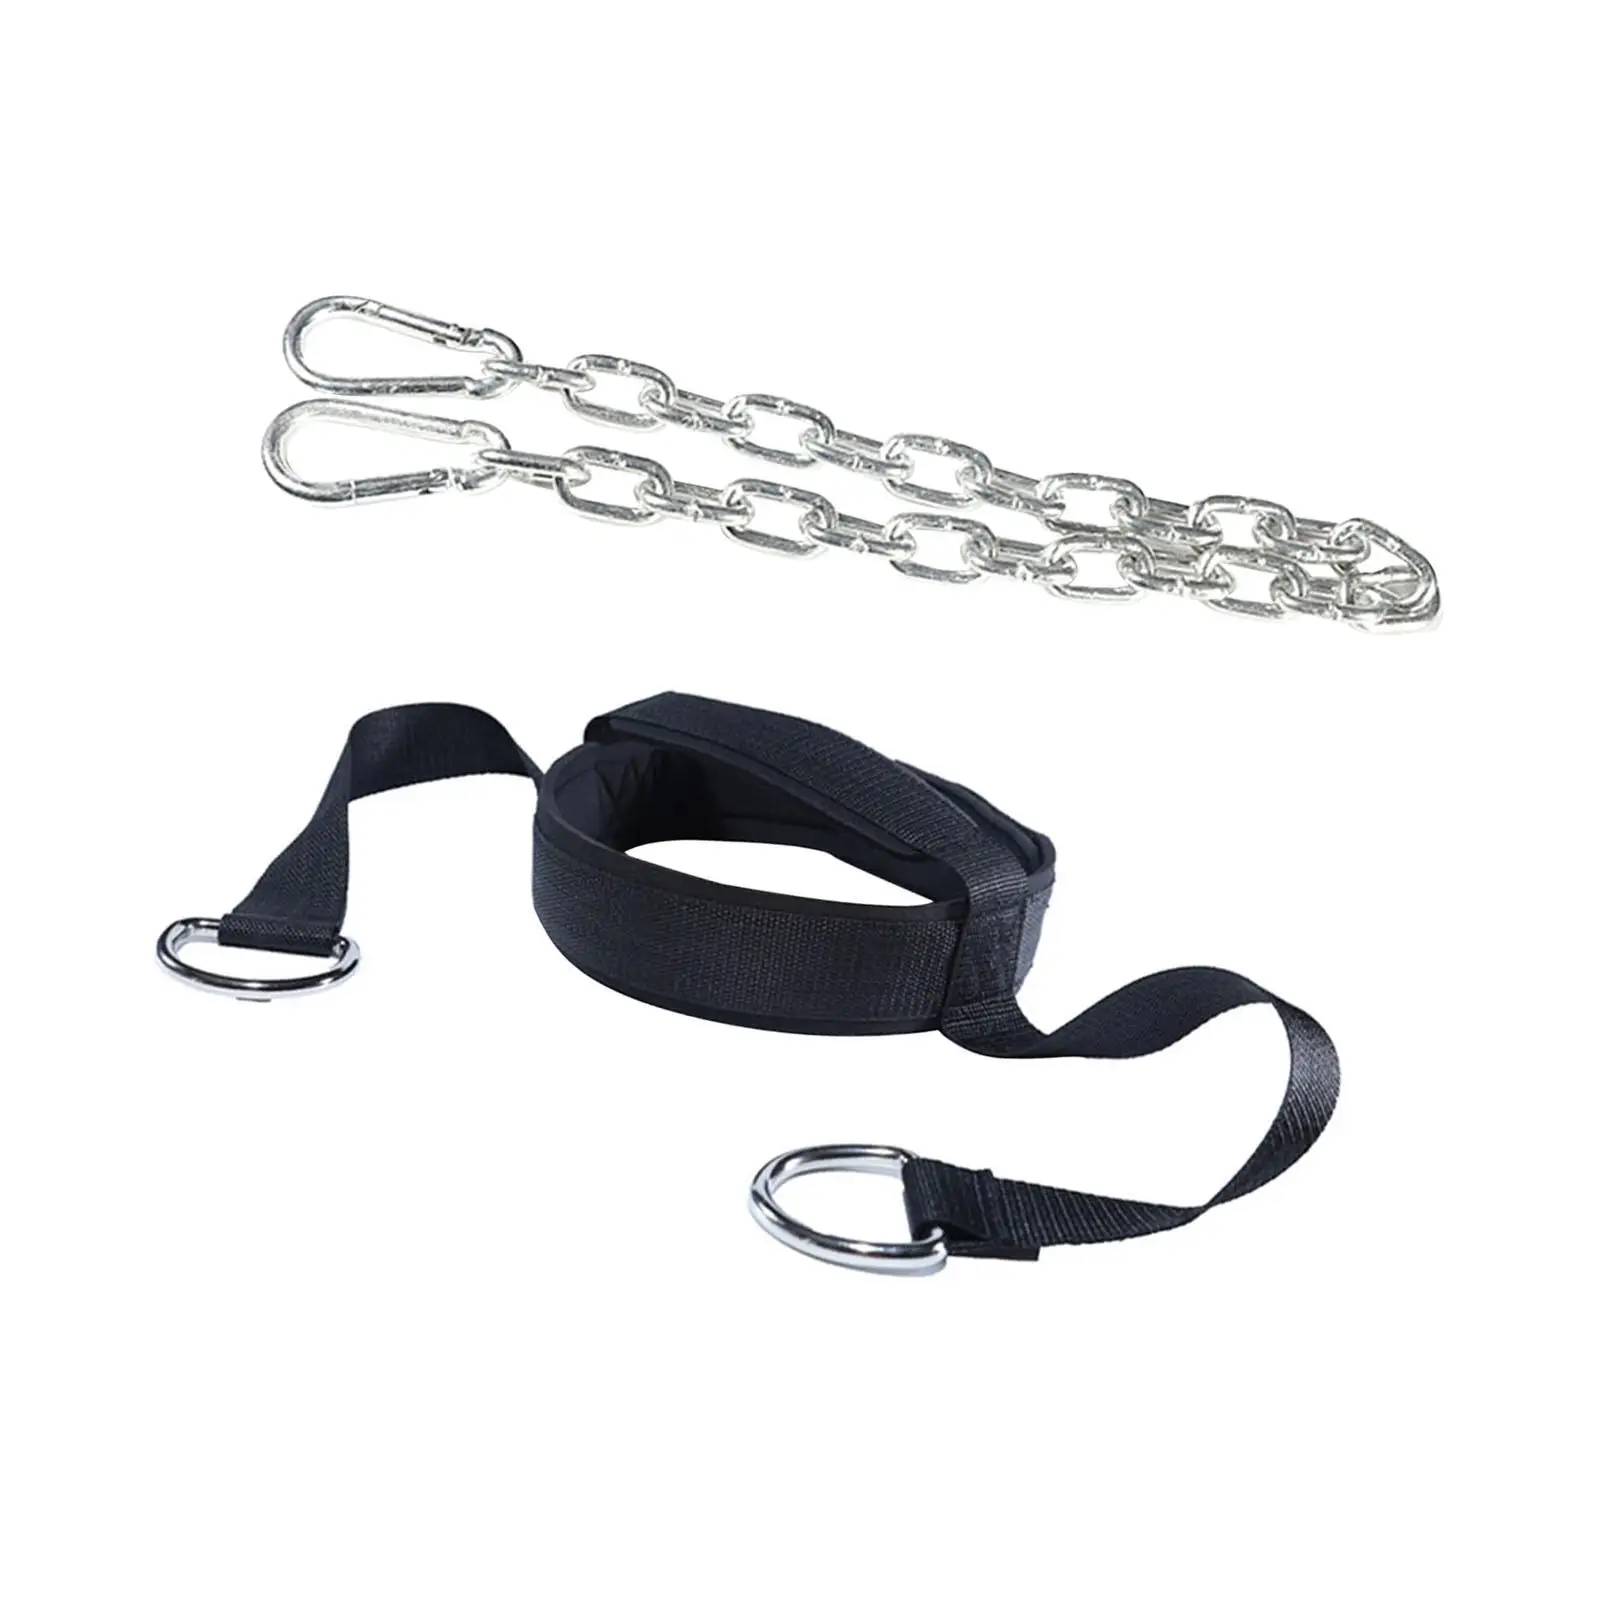 Neck Harness Adjustable Neck Exercise Equipment with Metal Chain Heavy Duty